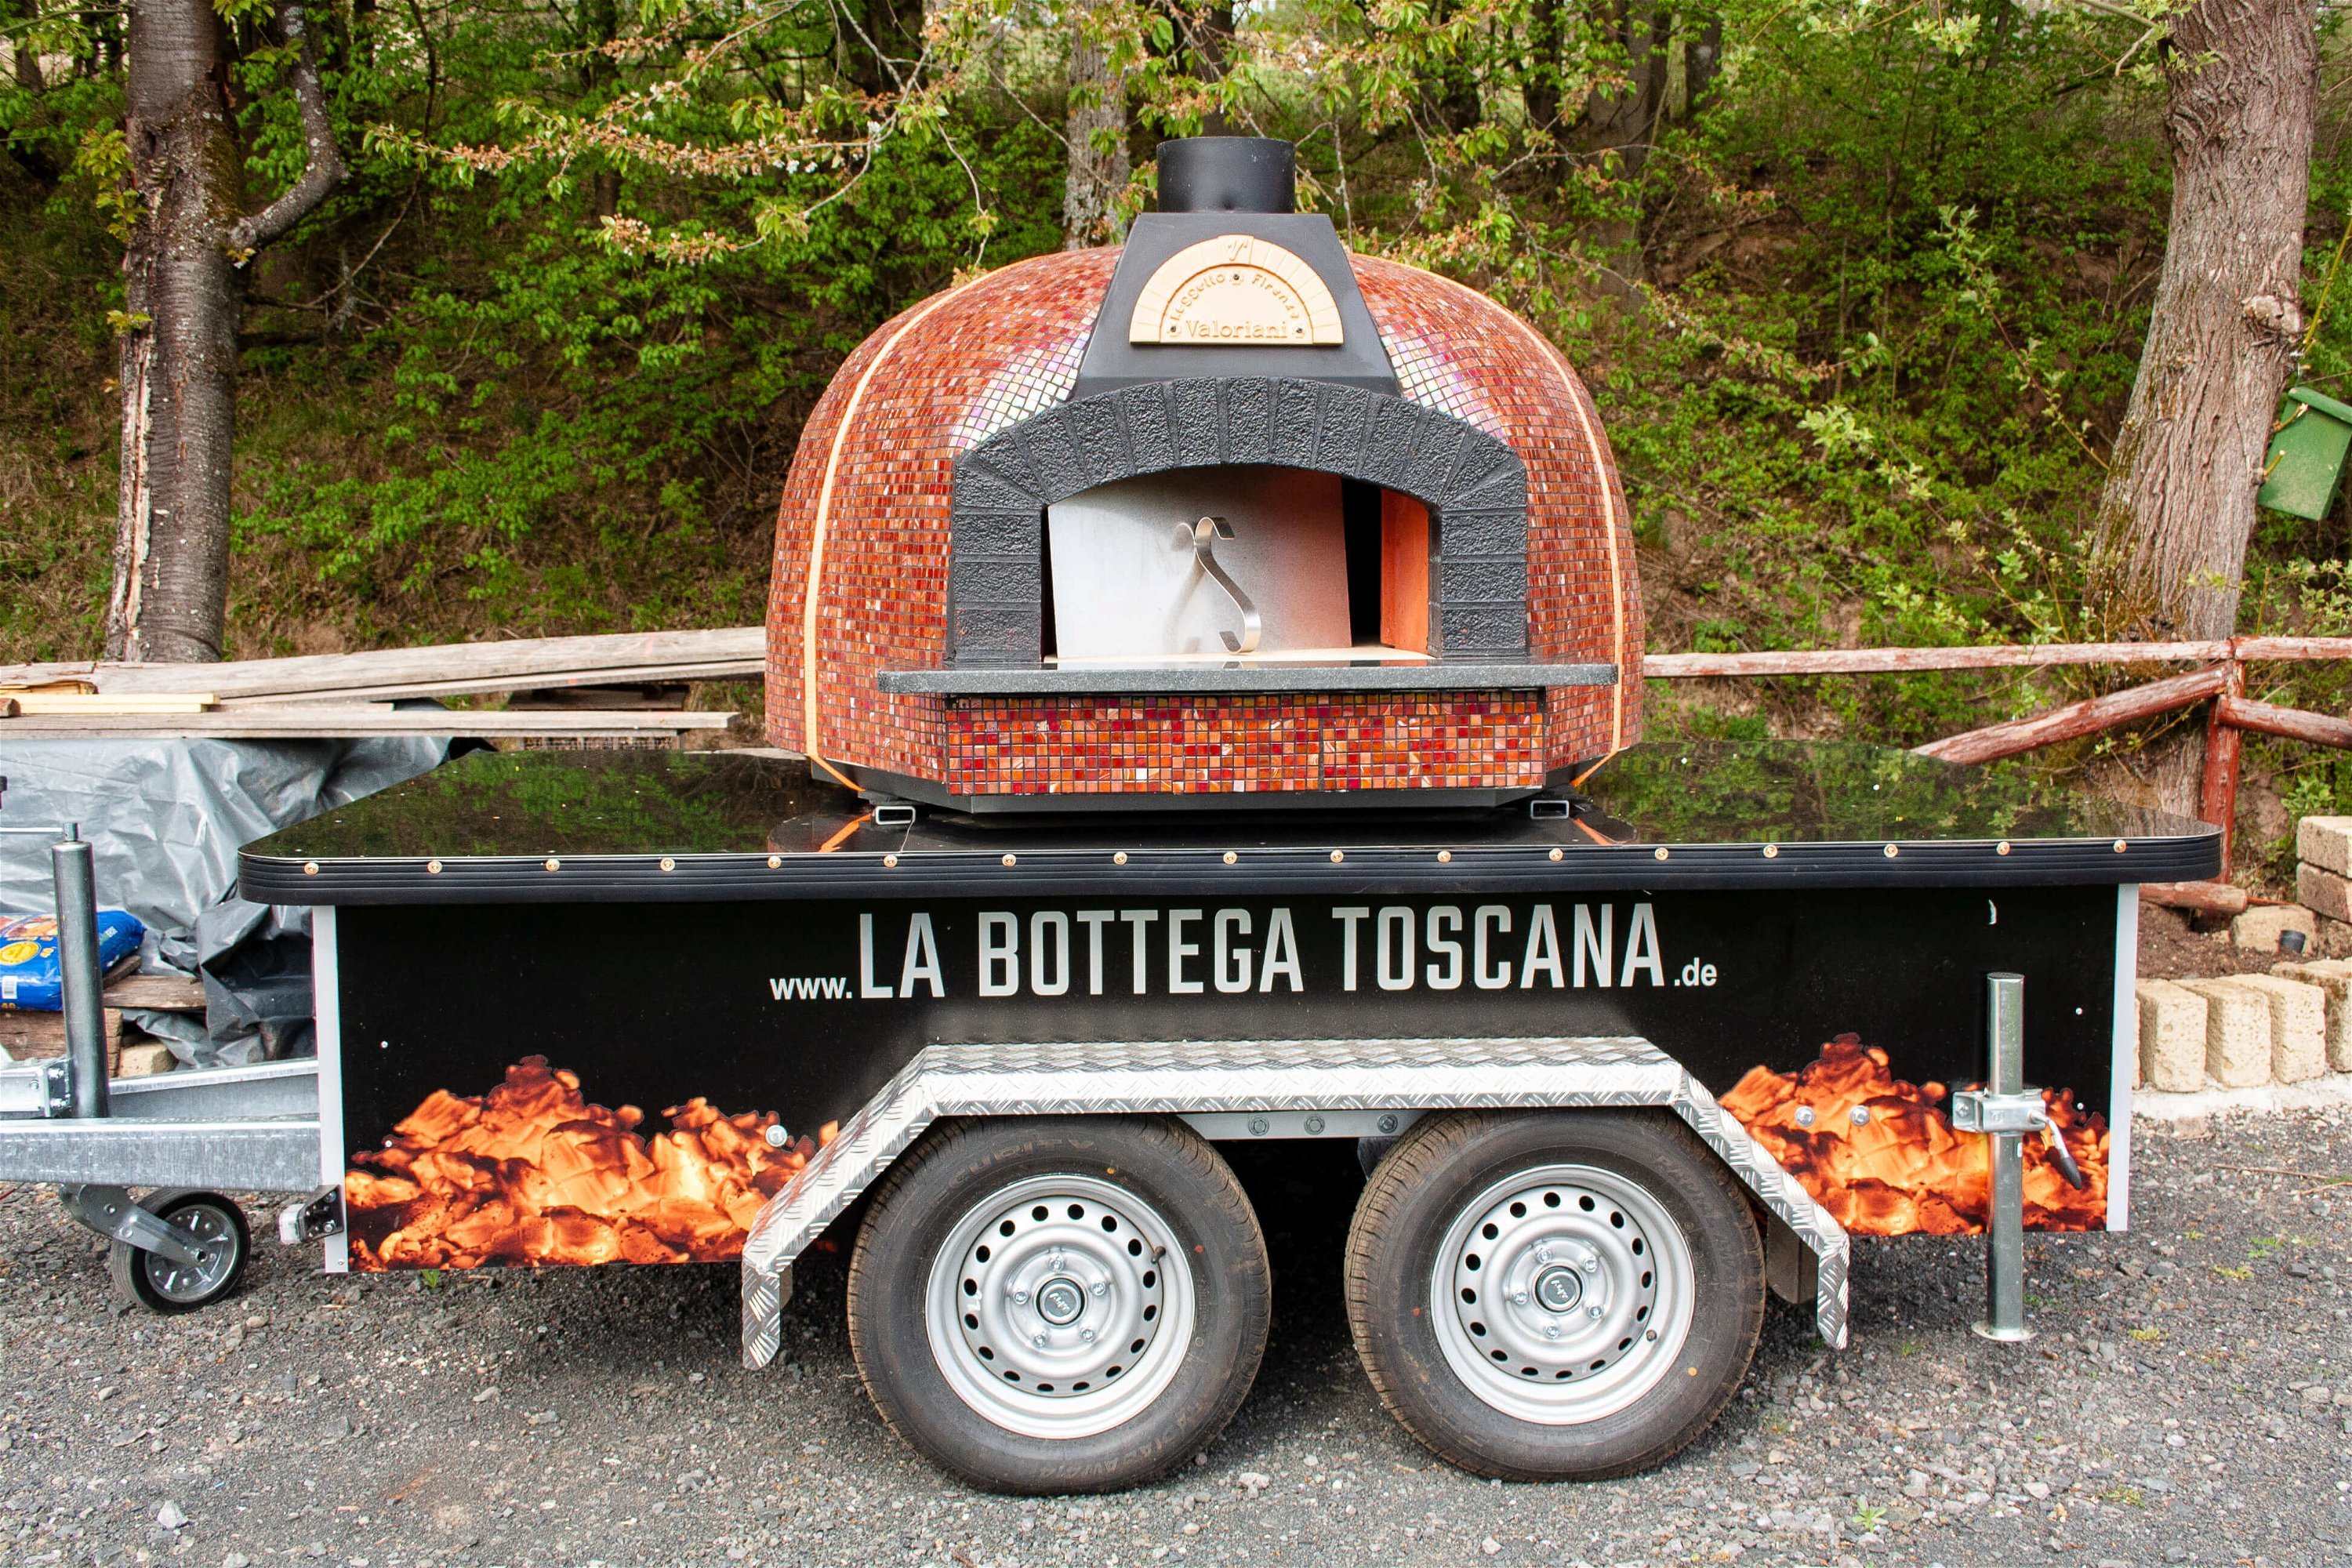 Valoriani pizza oven trailer: Igloo or hobby with mosaic on trailer for gastro, catering, street food